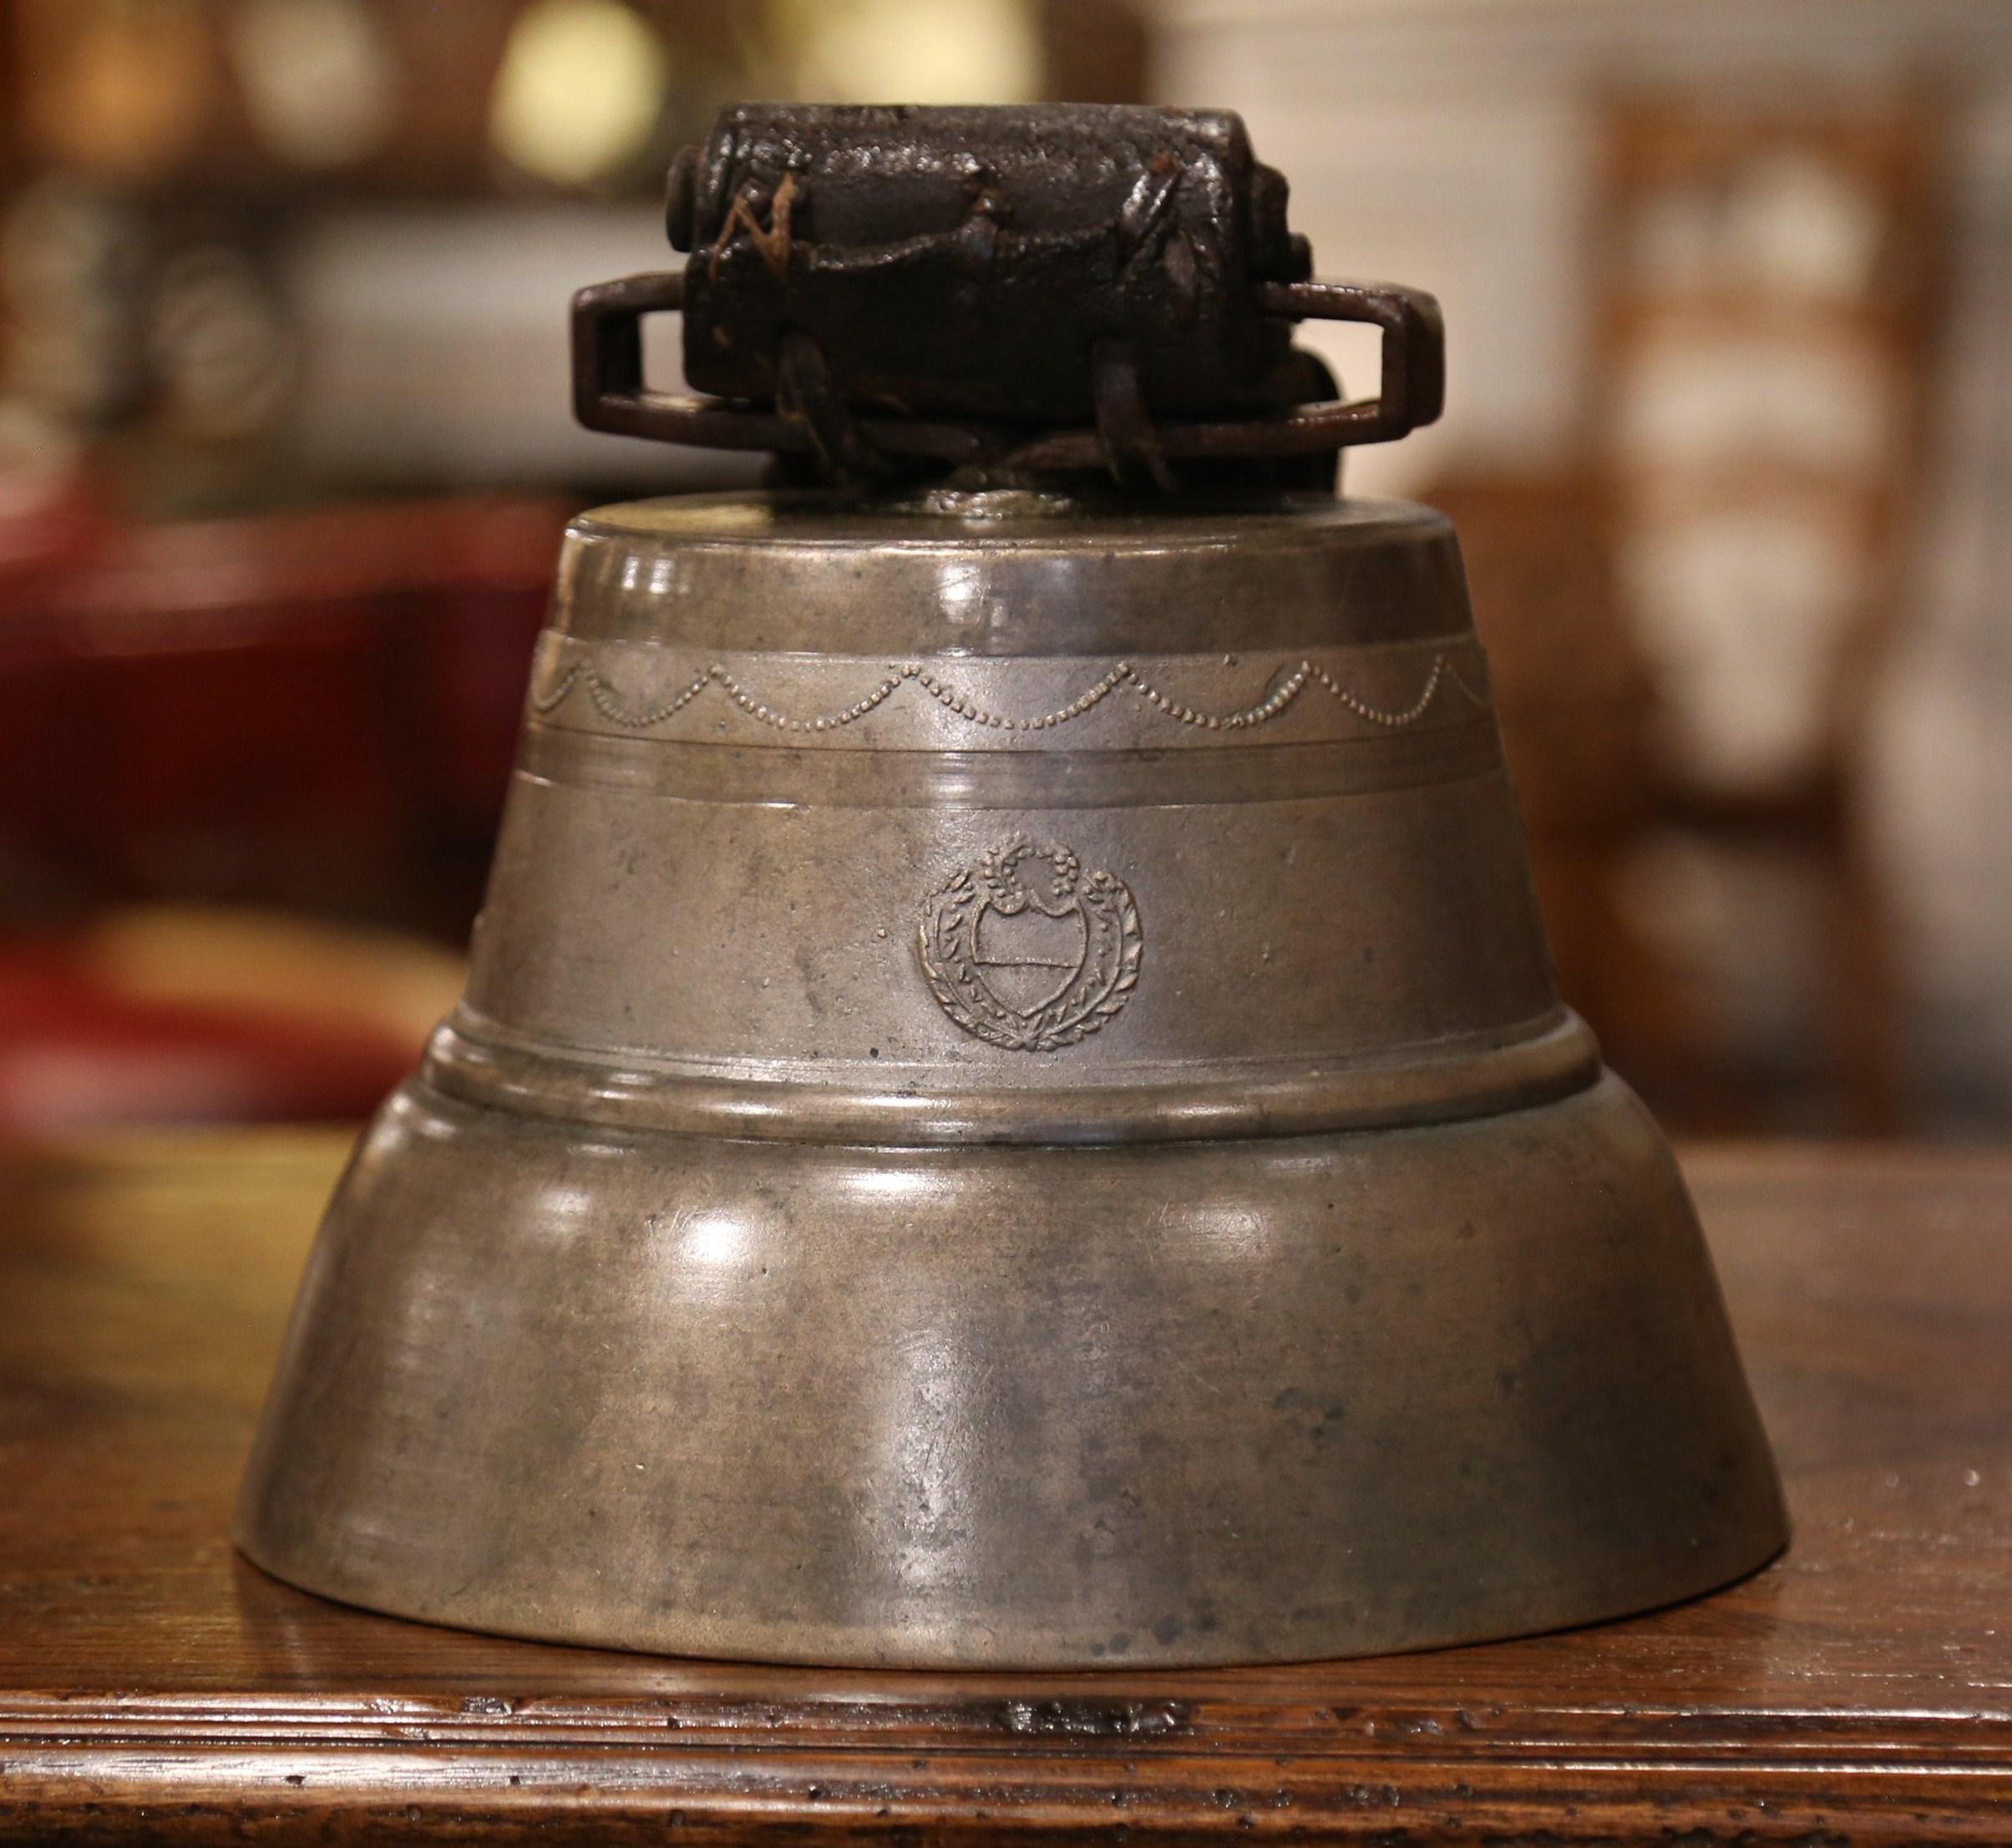 Bring the French countryside into your home with this large patinated bronze bell from the Alps region of France, dated 1900, the antique bell features several motifs in relief including garland decor around the top, flower and crest motifs. The